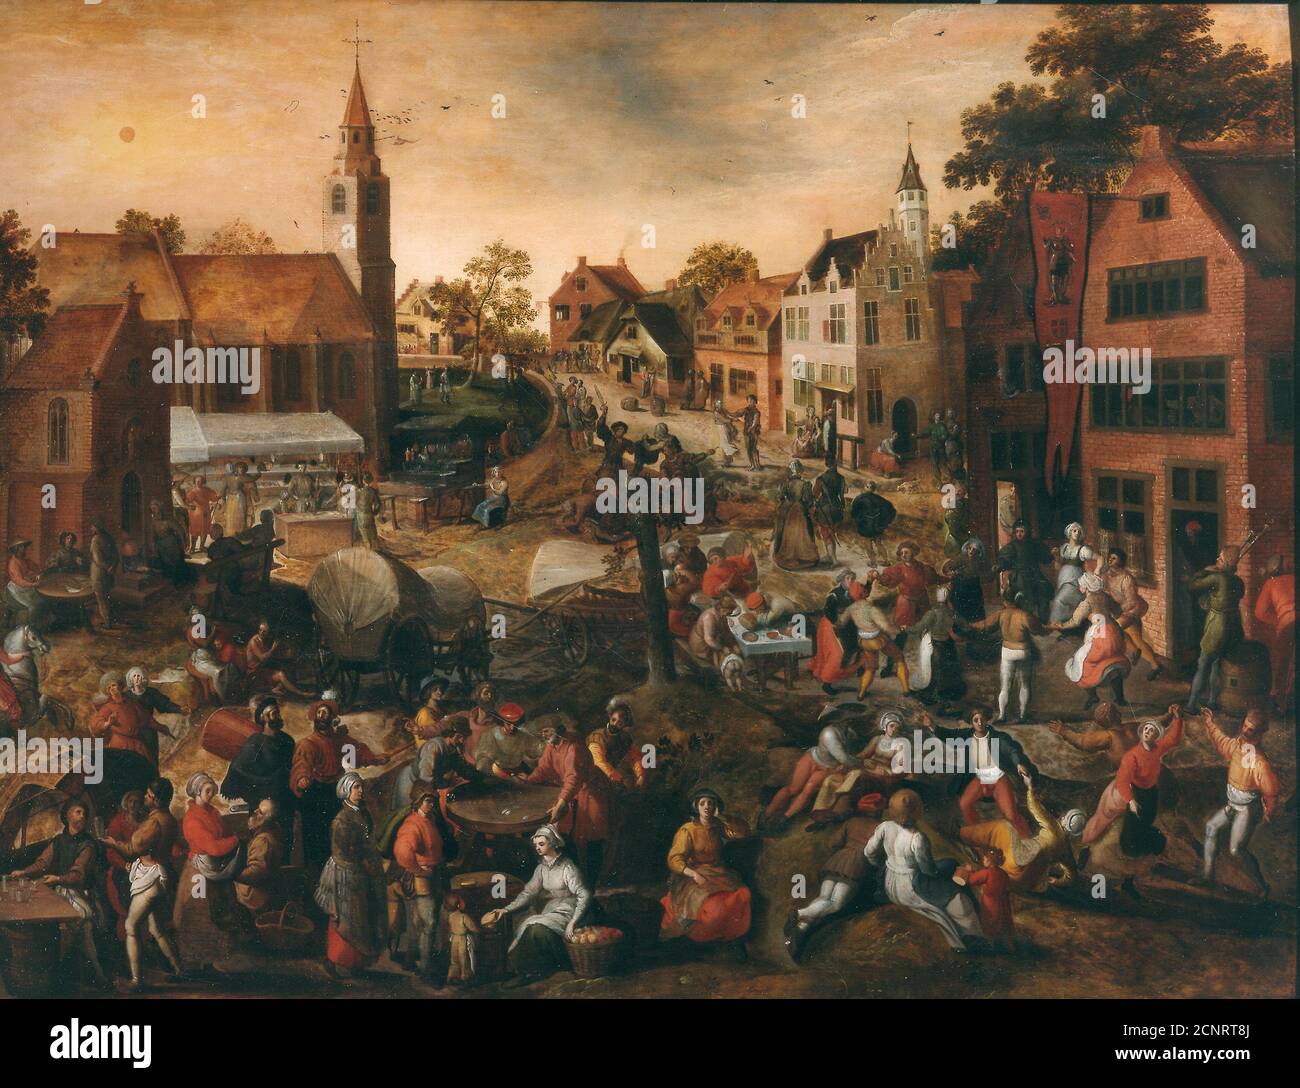 Village Festival, Mid of 16th cen.. Found in the collection of Museum voor Schone Kunsten, Ghent. Stock Photo